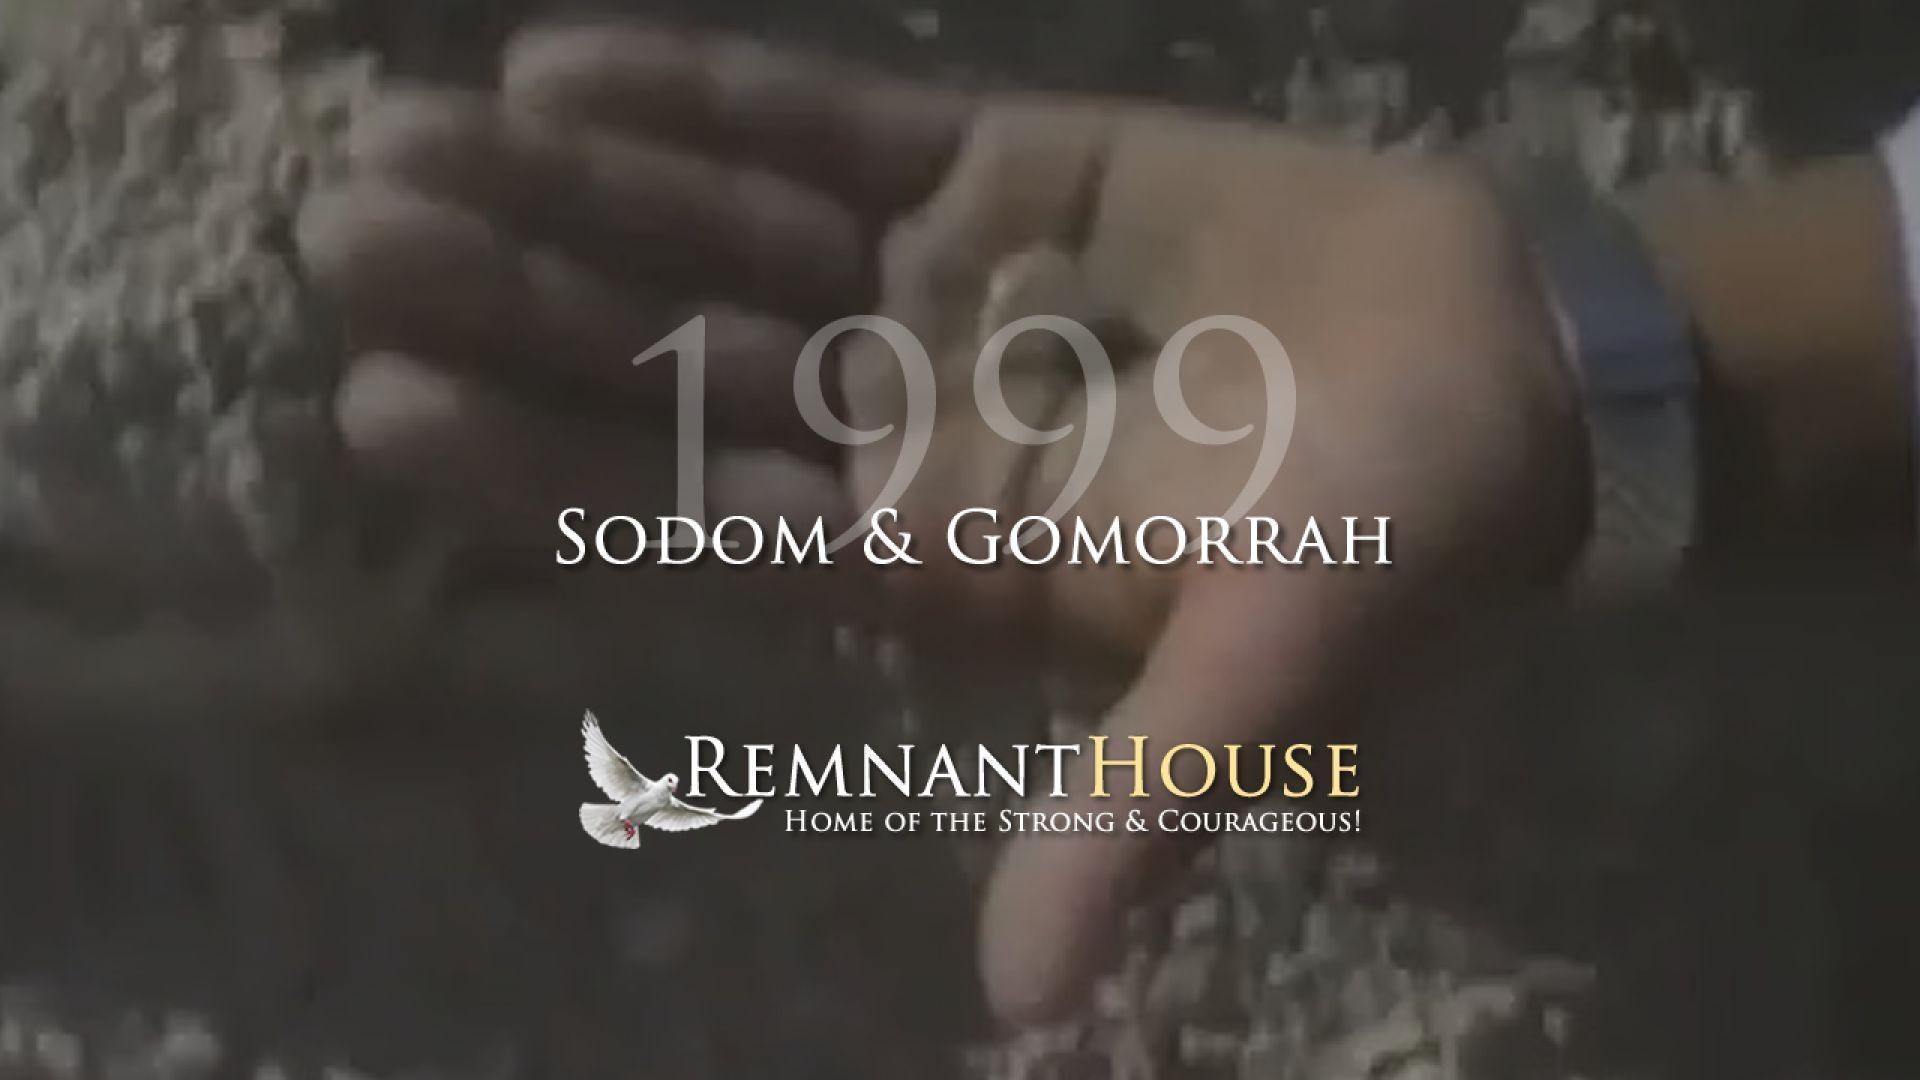 Sodom & Gomorrah FOUND in 1999 with Peter Michael Martinez